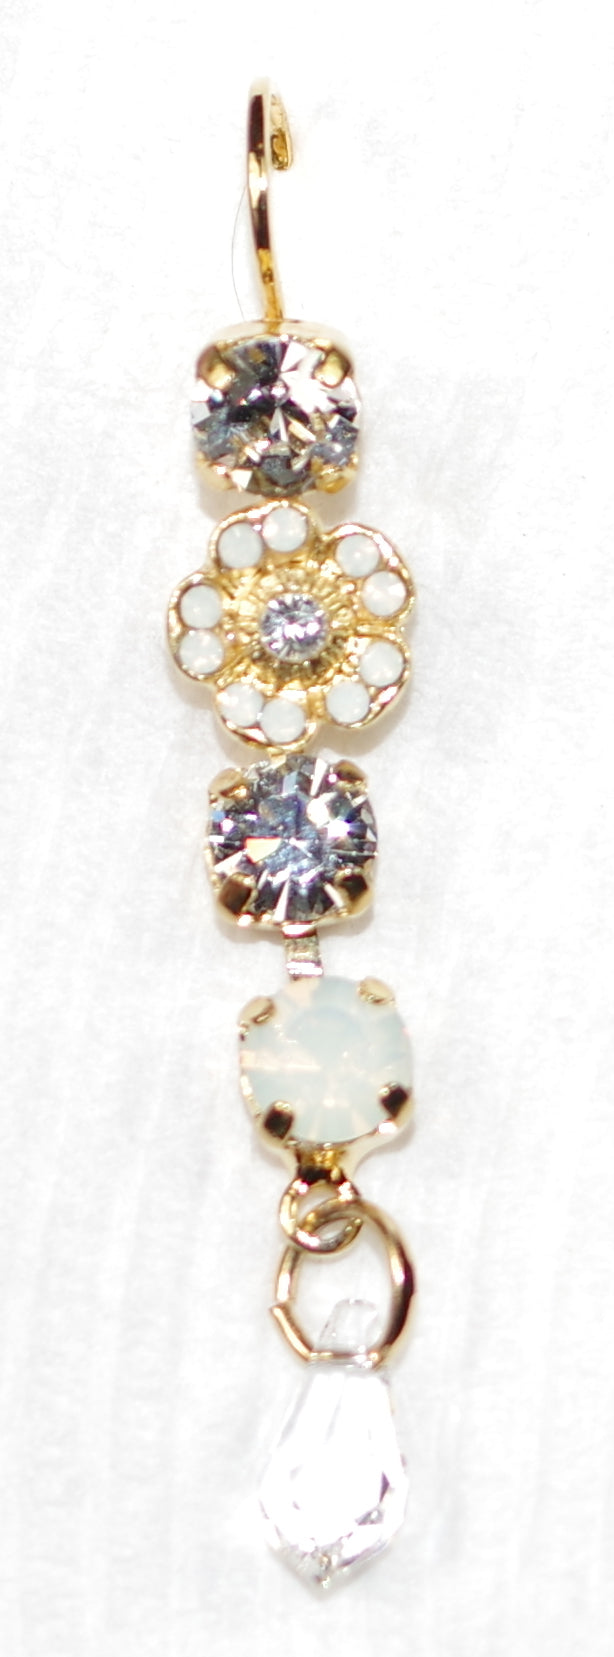 MARIANA EARRINGS: white opal, clear stones in 2" yellow gold setting, lever back